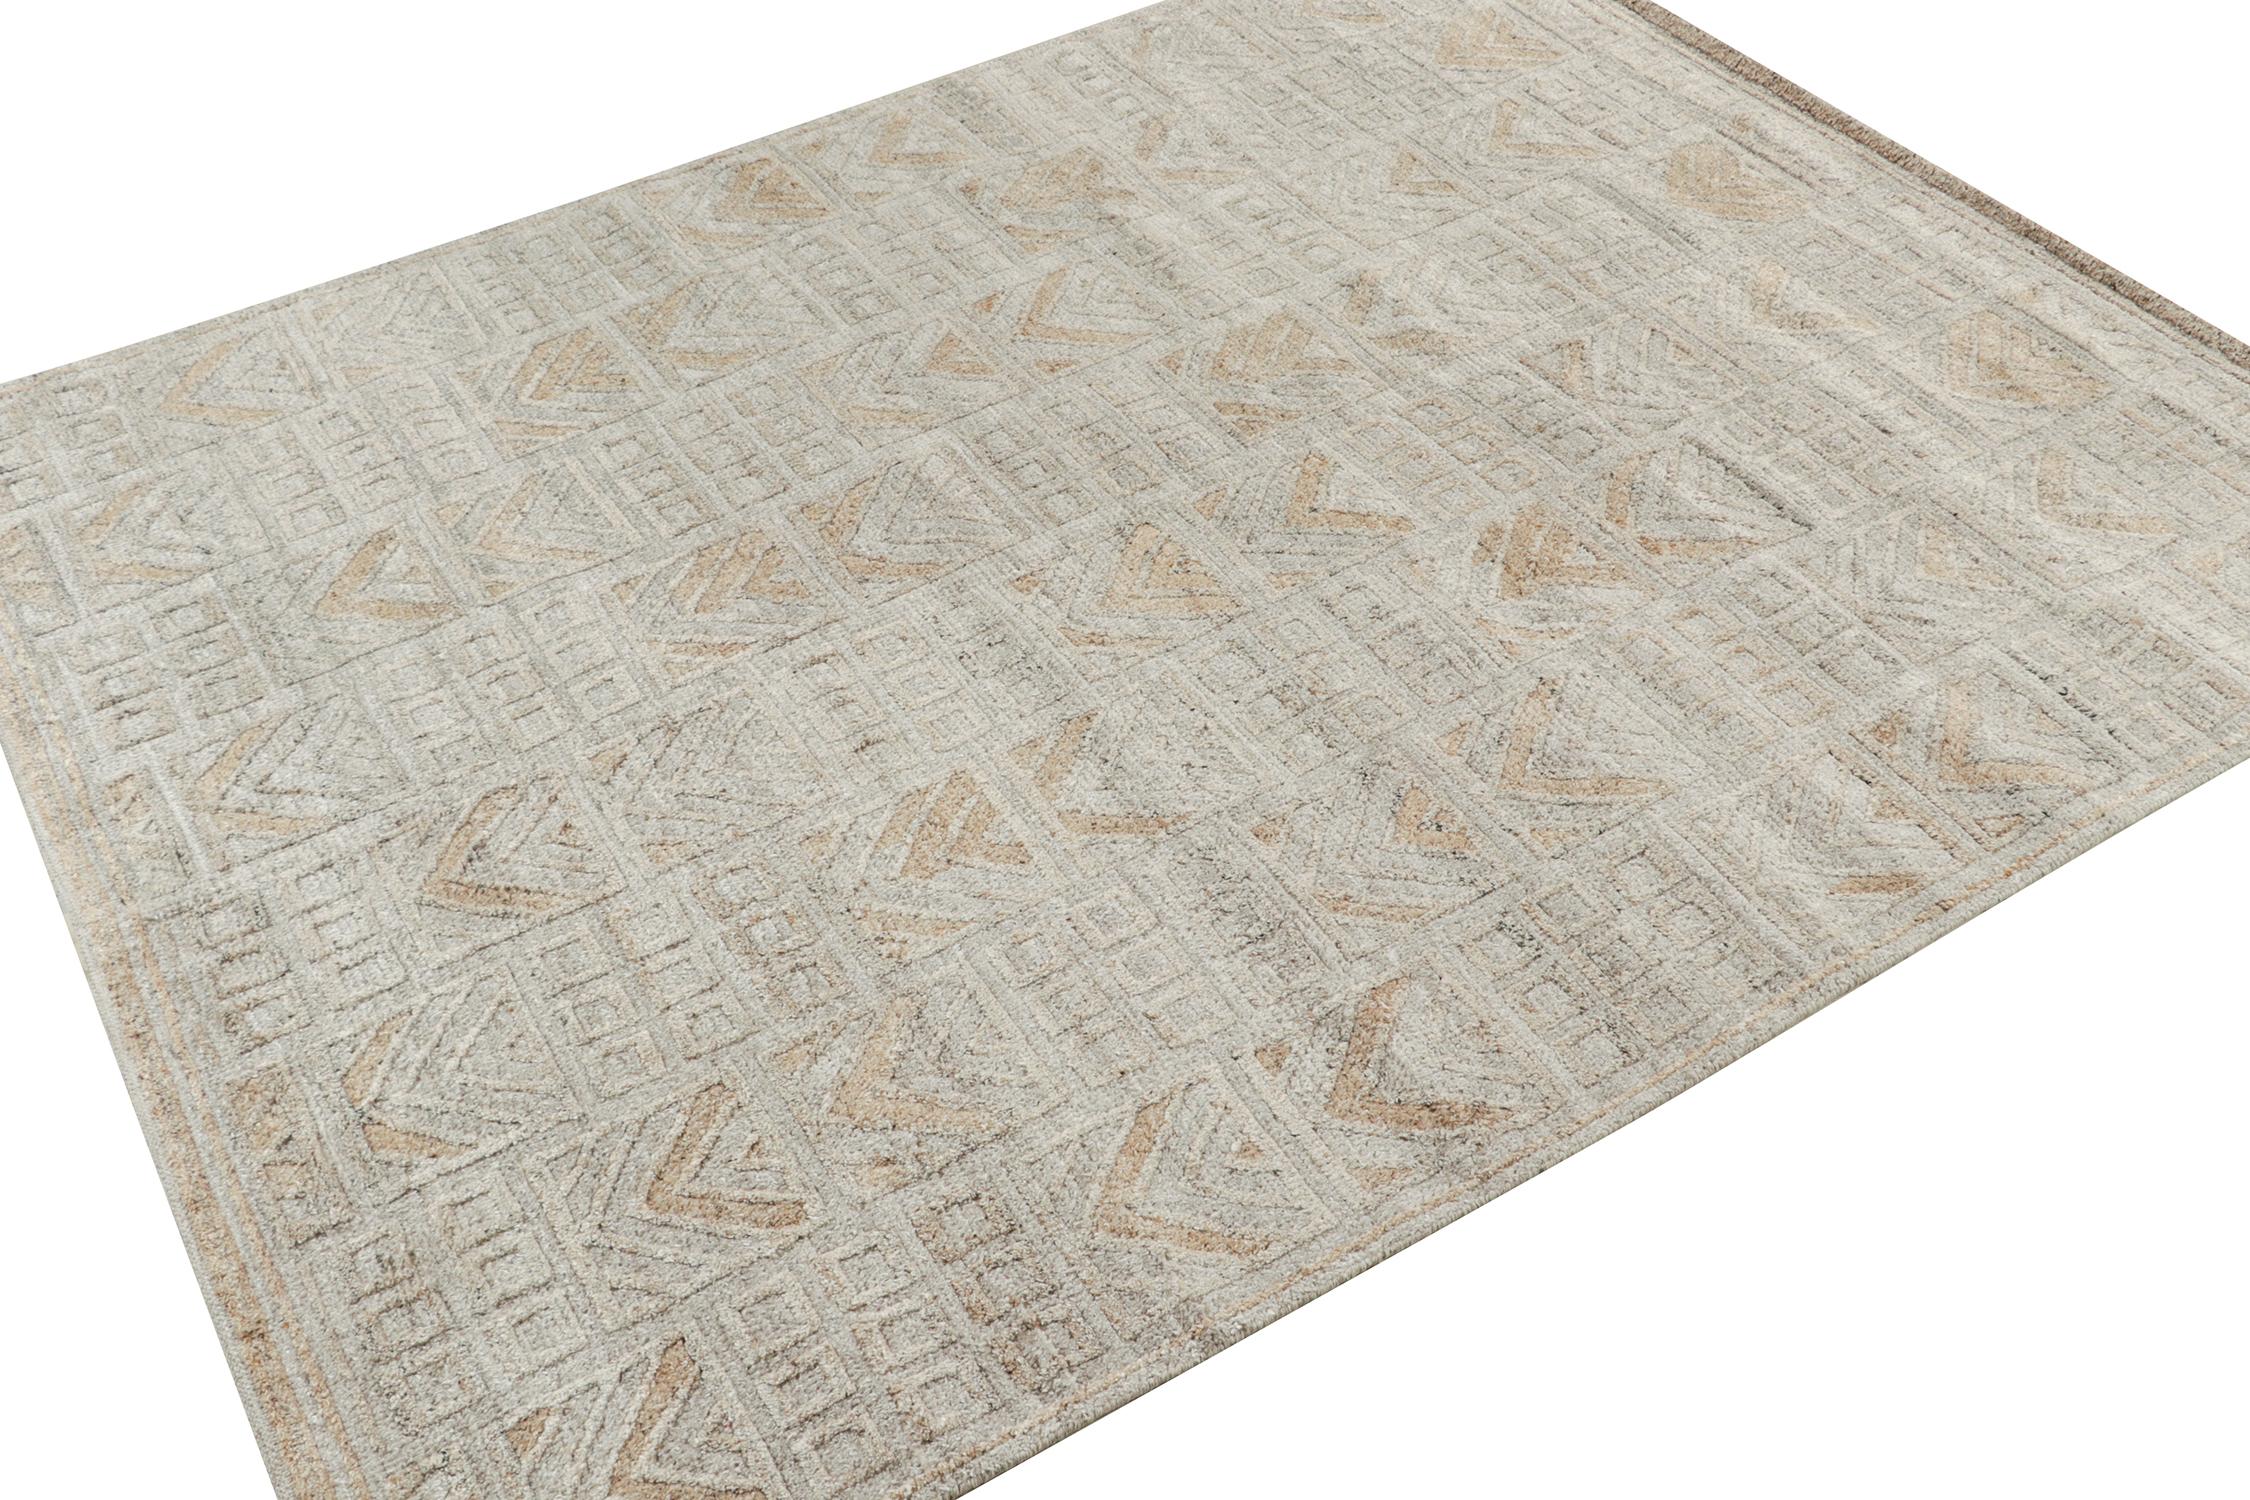 An 8x10 Swedish outdoor style pile rug from our award-winning Scandinavian collection. Handwoven in performance polyester. 
On the Design: 
This rug enjoys a smart sense of movement with crisp geometric patterns in beige and brown on a soothing